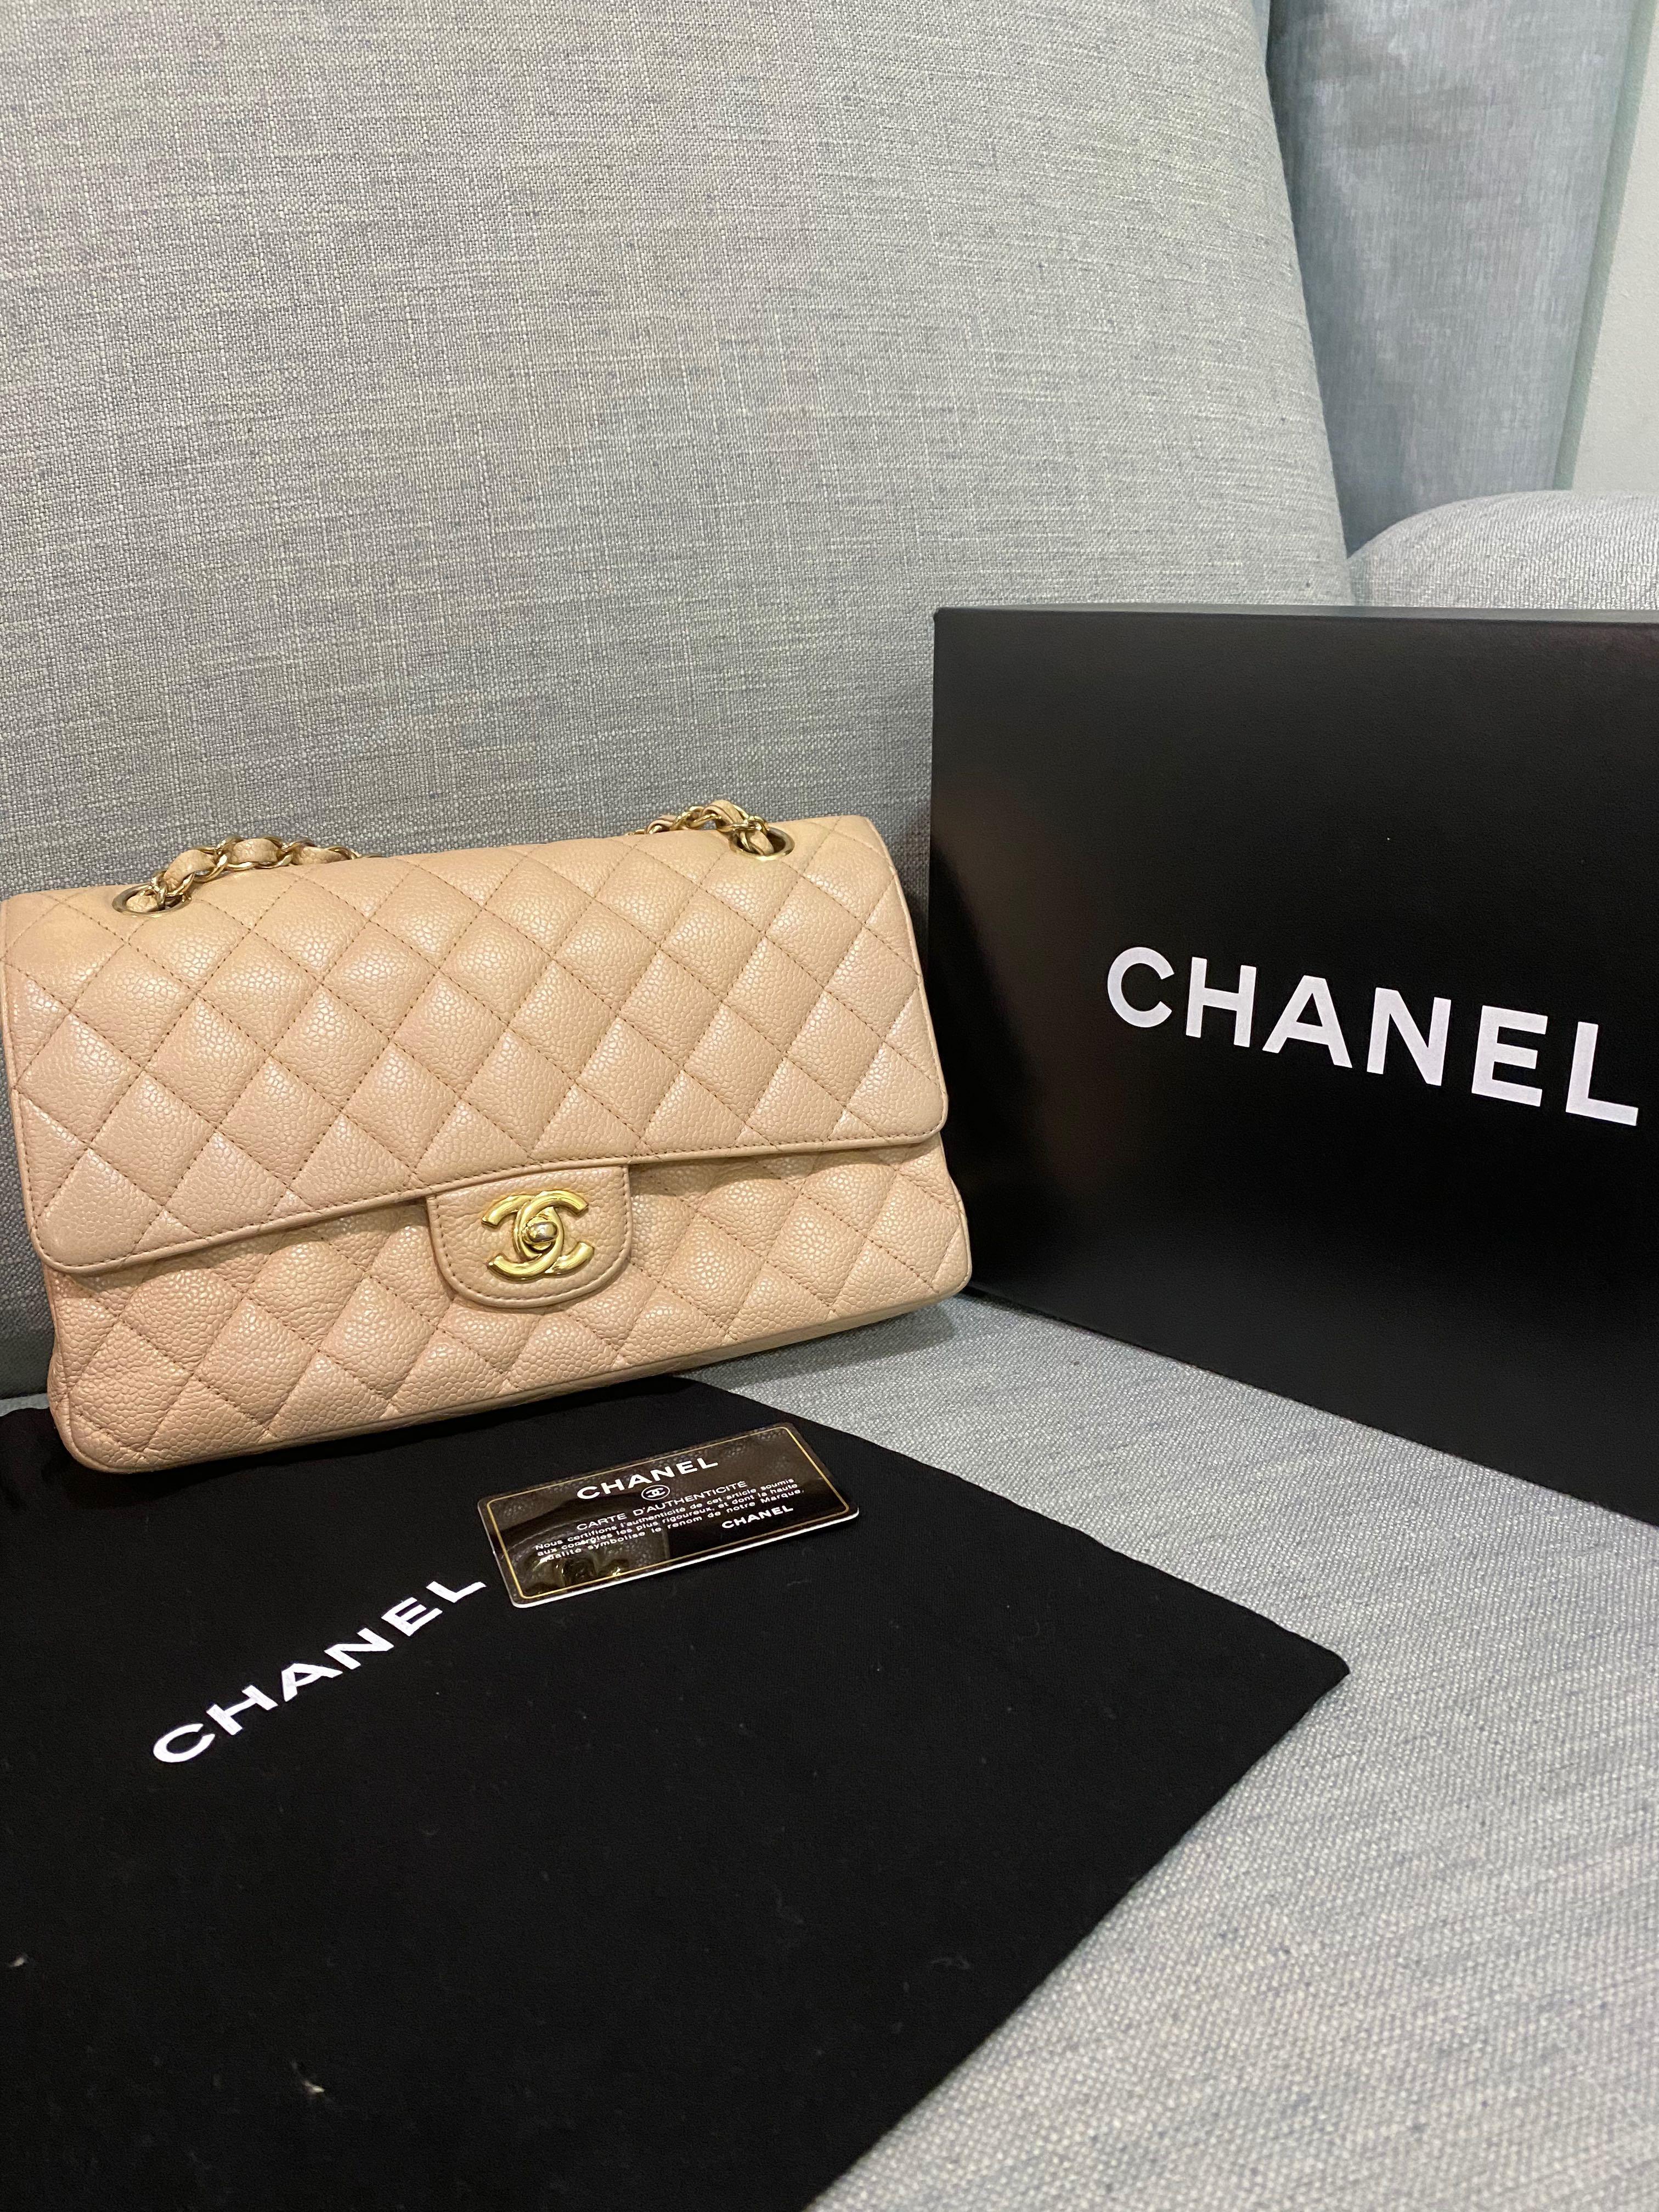 Chanel Classic Medium Double Flap in Beige Clair Caviar Leather